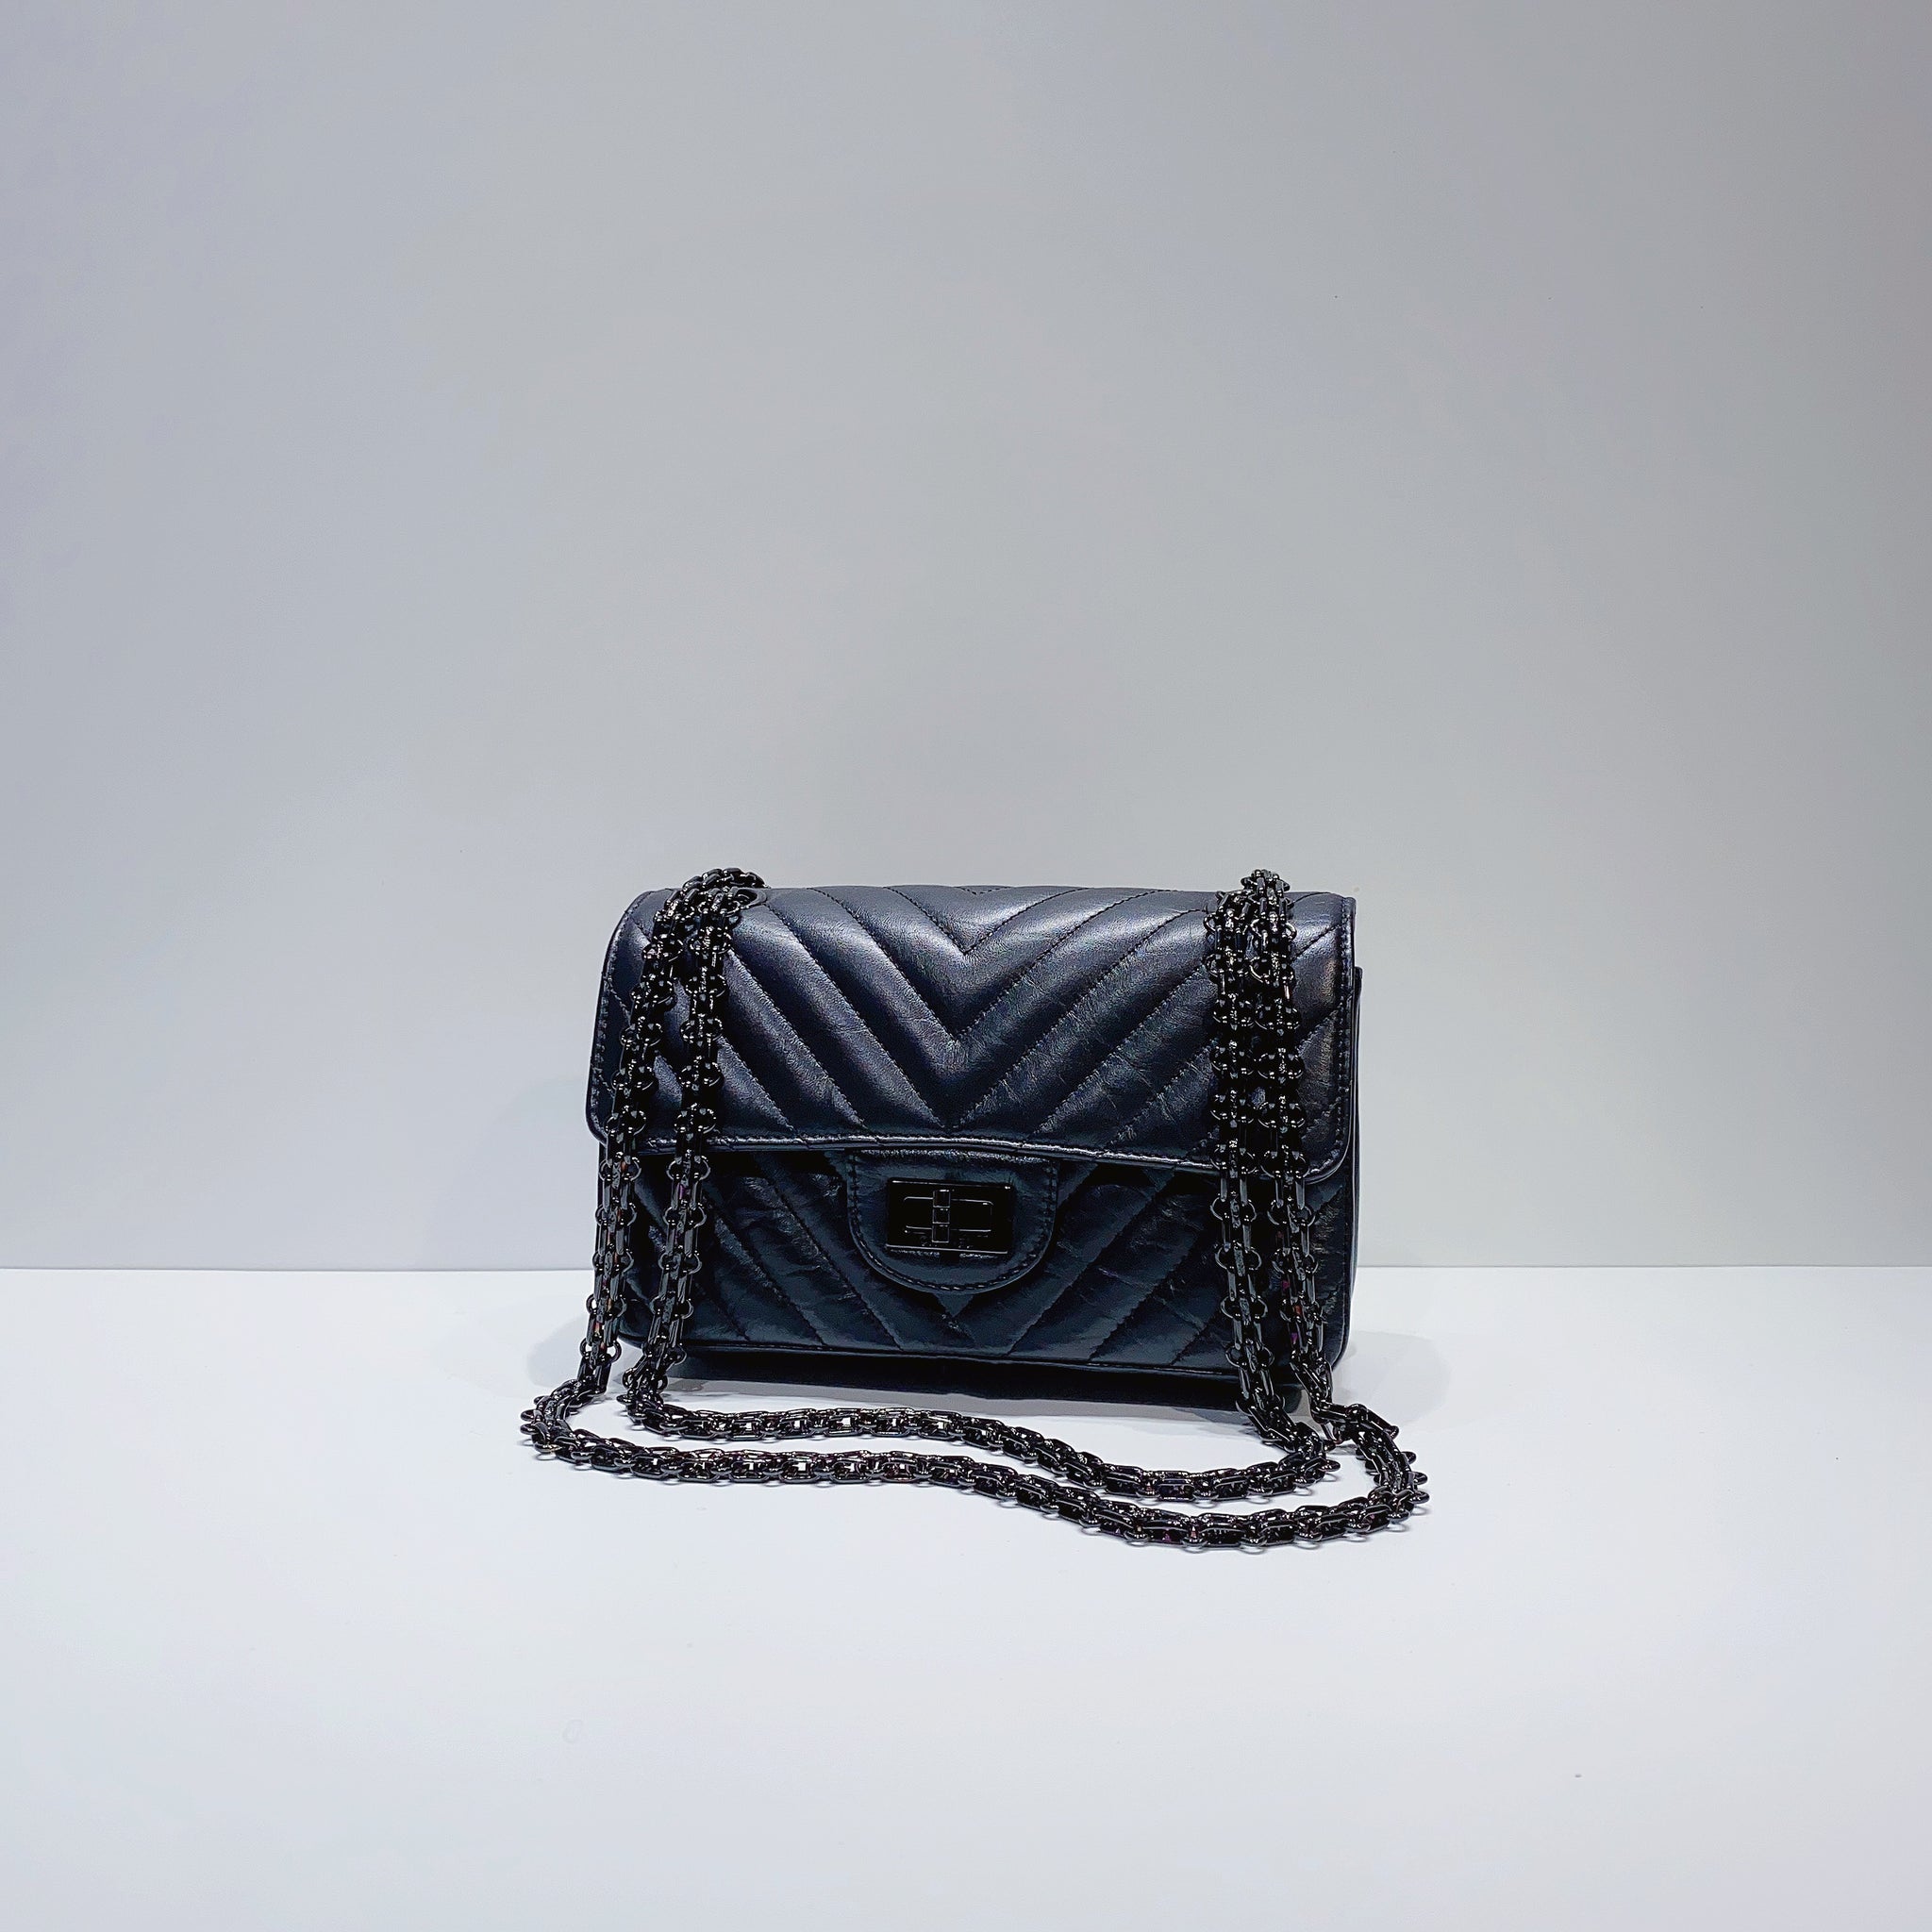 No.3717-Chanel So Black Mini Reissue 2.55 Flap Bag – Gallery Luxe